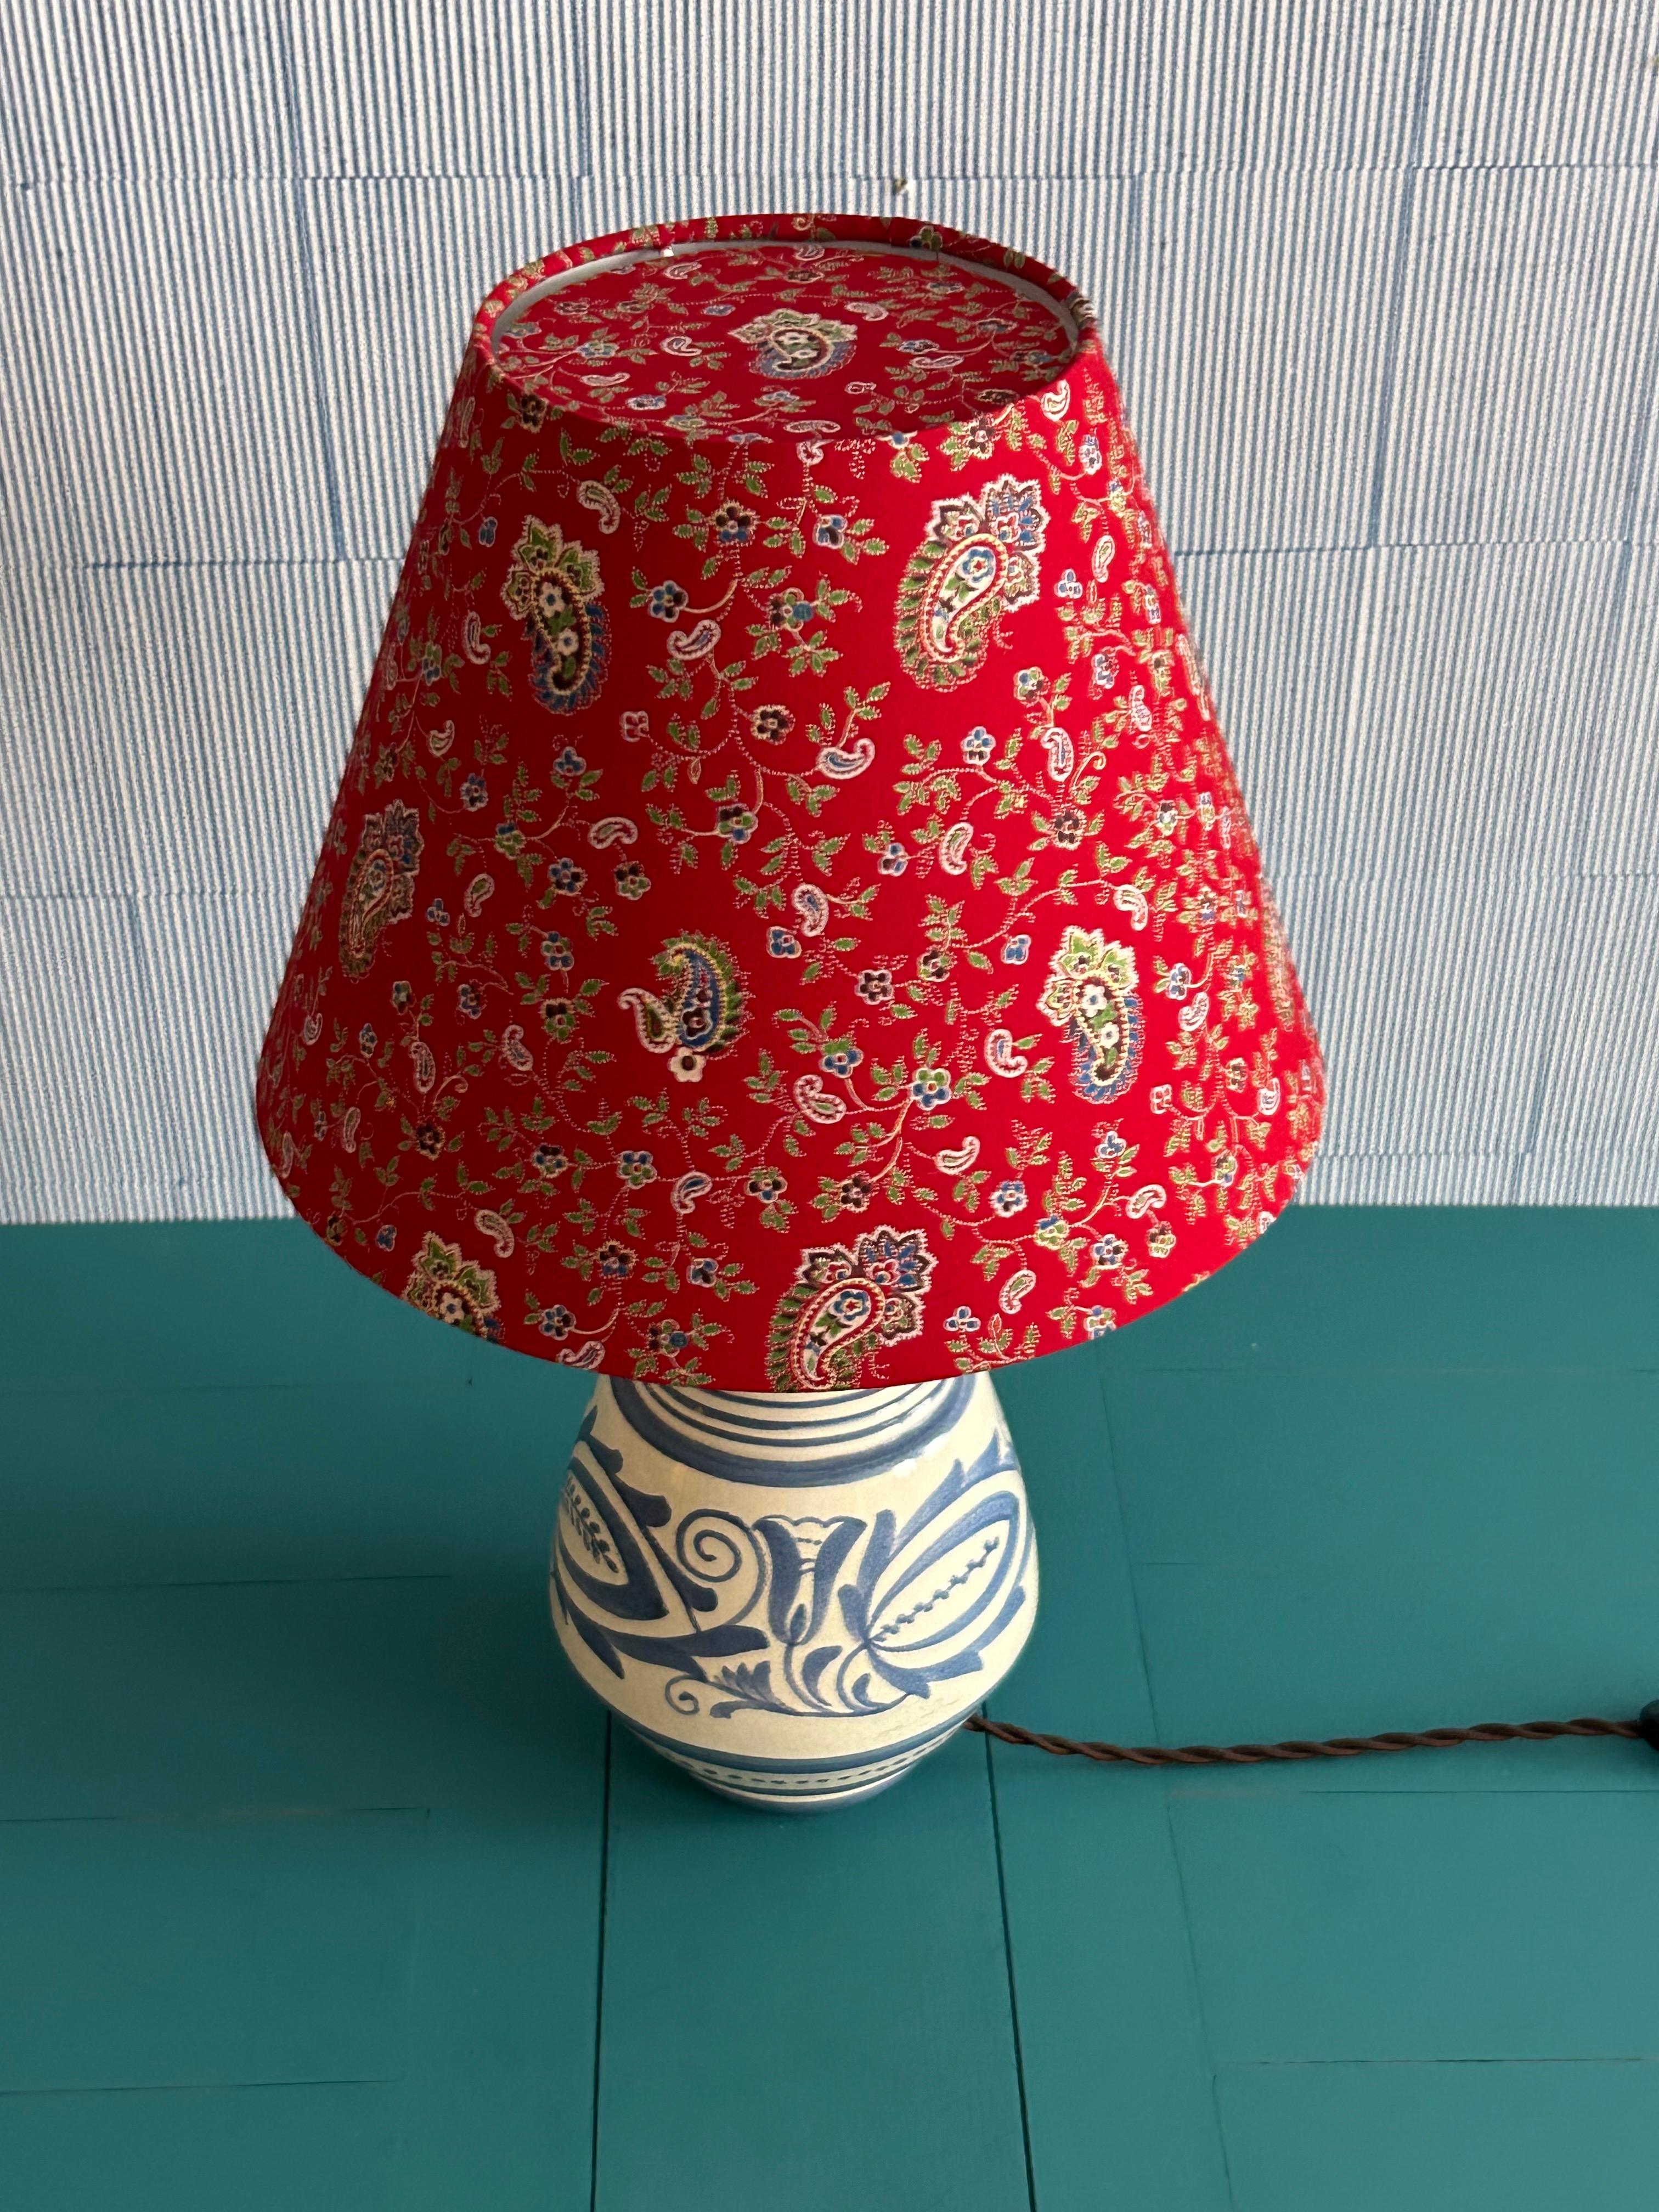 Vintage Blue Ceramic Table Lamp with Red Customized Shade, France, 20th Century For Sale 2